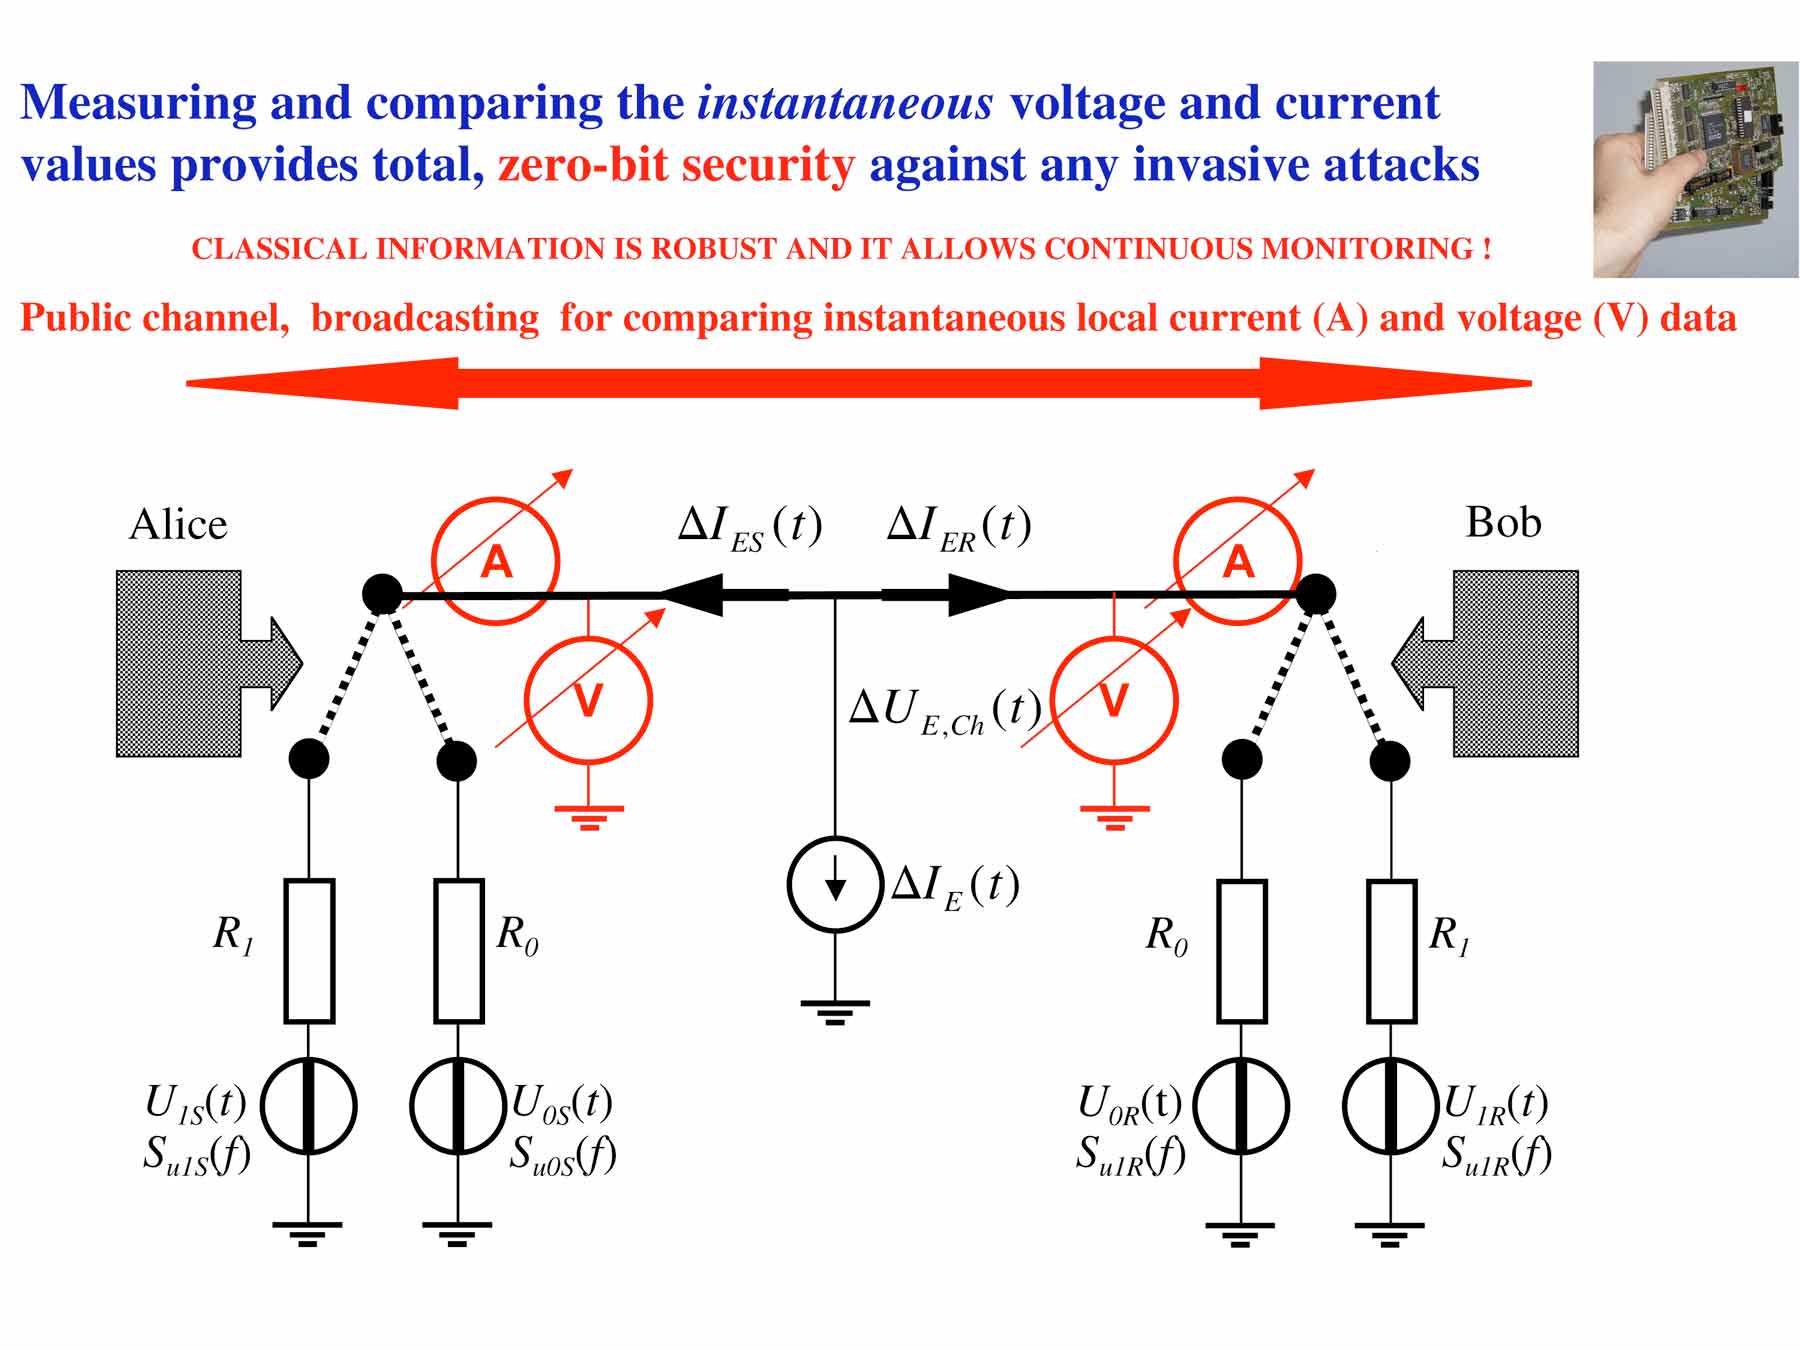 Continuous comparison of voltage and current
                    data at the wire ends.